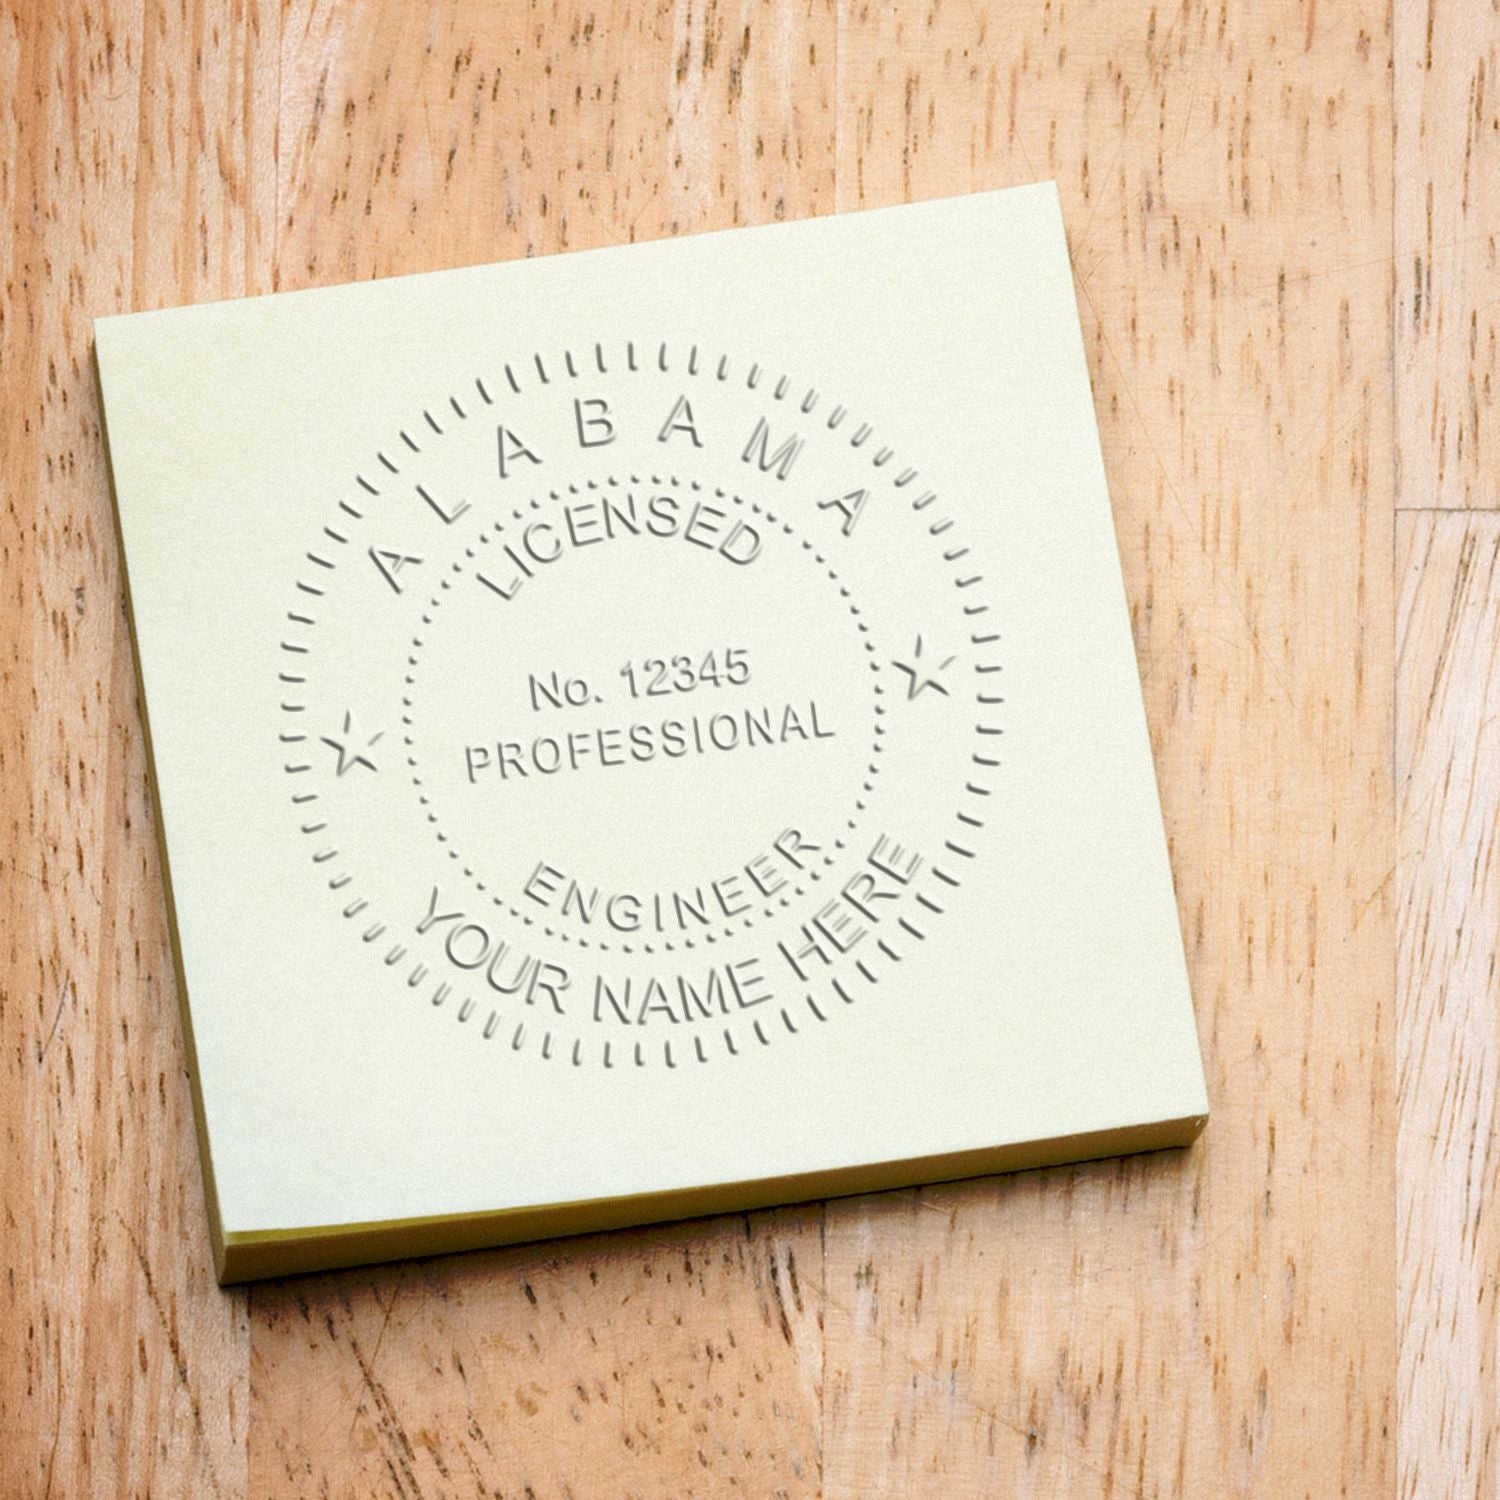 This paper is stamped with a sample imprint of the Soft Alabama Professional Engineer Seal, signifying its quality and reliability.